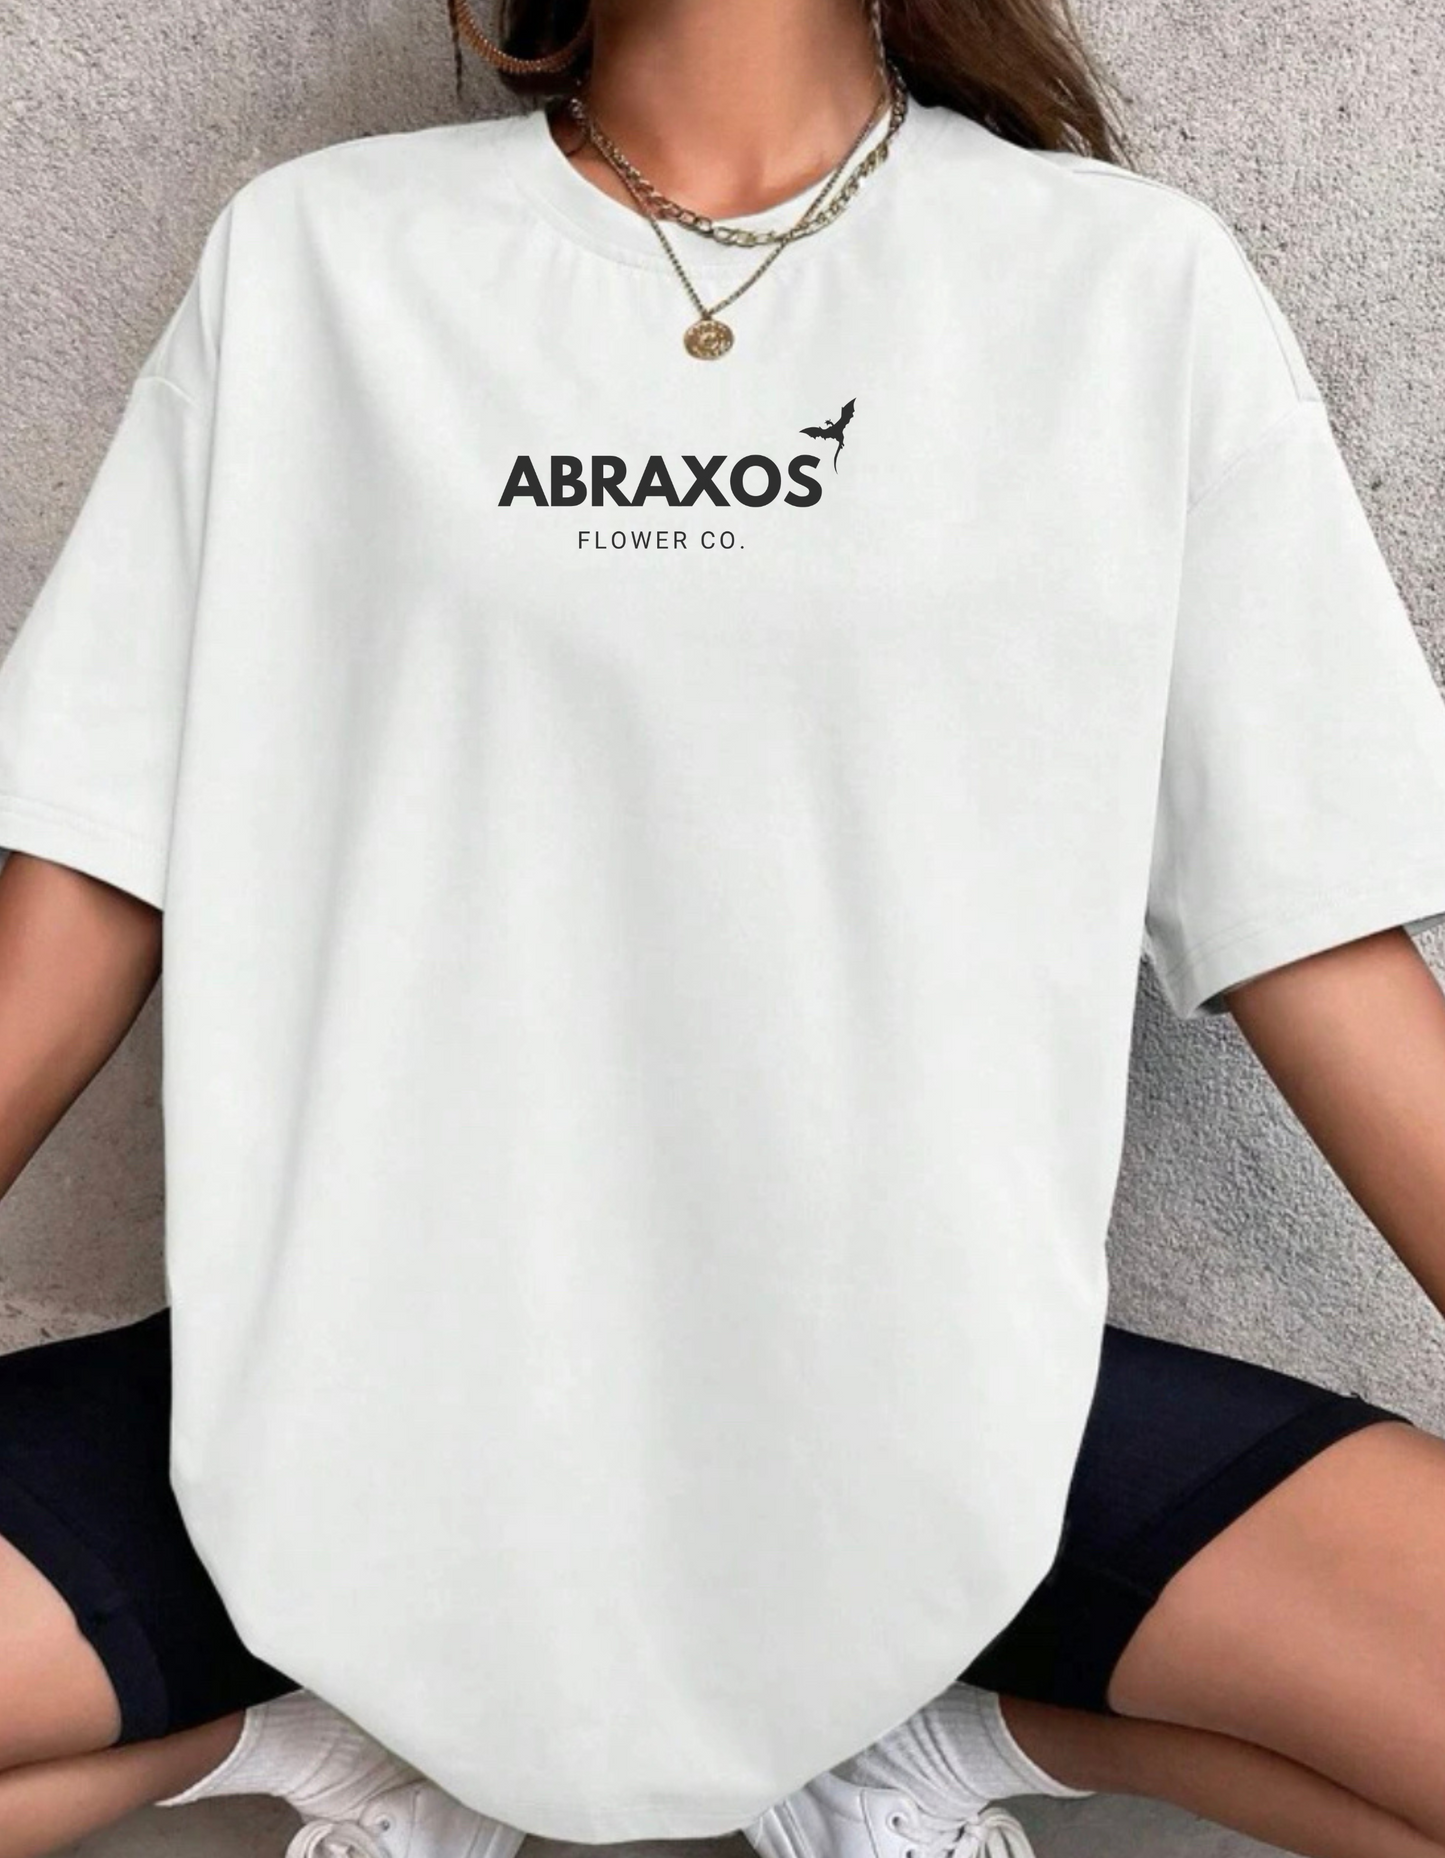 Abraxos T-Shirt Color, Throne of Glass